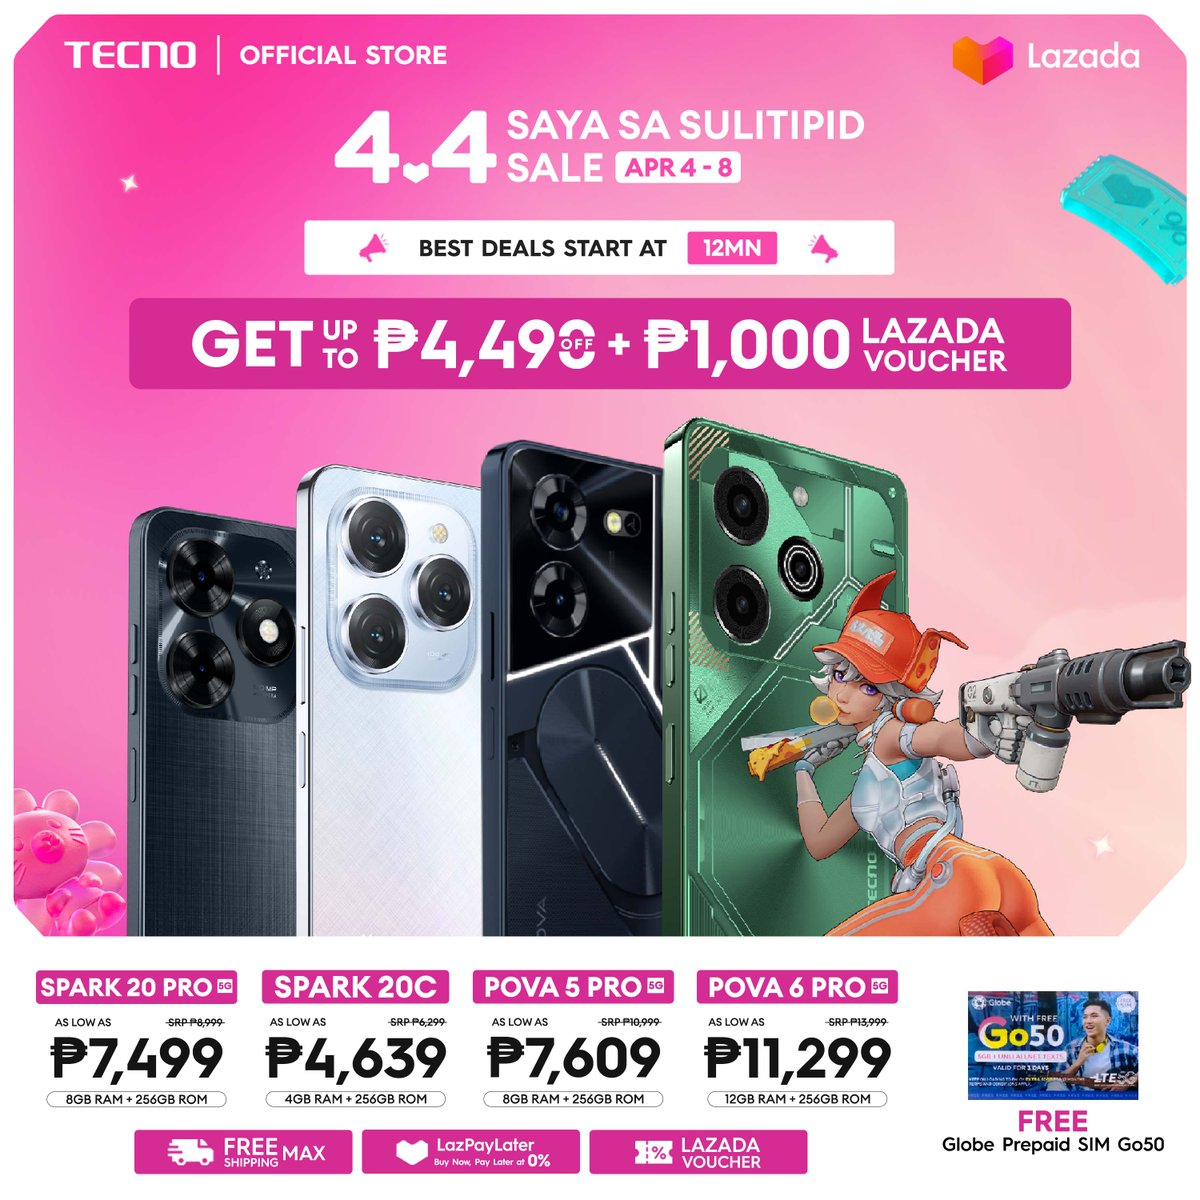 Hurry and grab the TECNO 4.4 Saya sa Sulitipid deal on Lazada! Enjoy up to Php 4,490 off plus a Php 1,000 Lazada Voucher. Offer valid from April 4-8 only. Add to cart and checkout at midnight! Limited time offer! Lazada: bit.ly/LazadaTecnoPro… #TECNOPhilippines